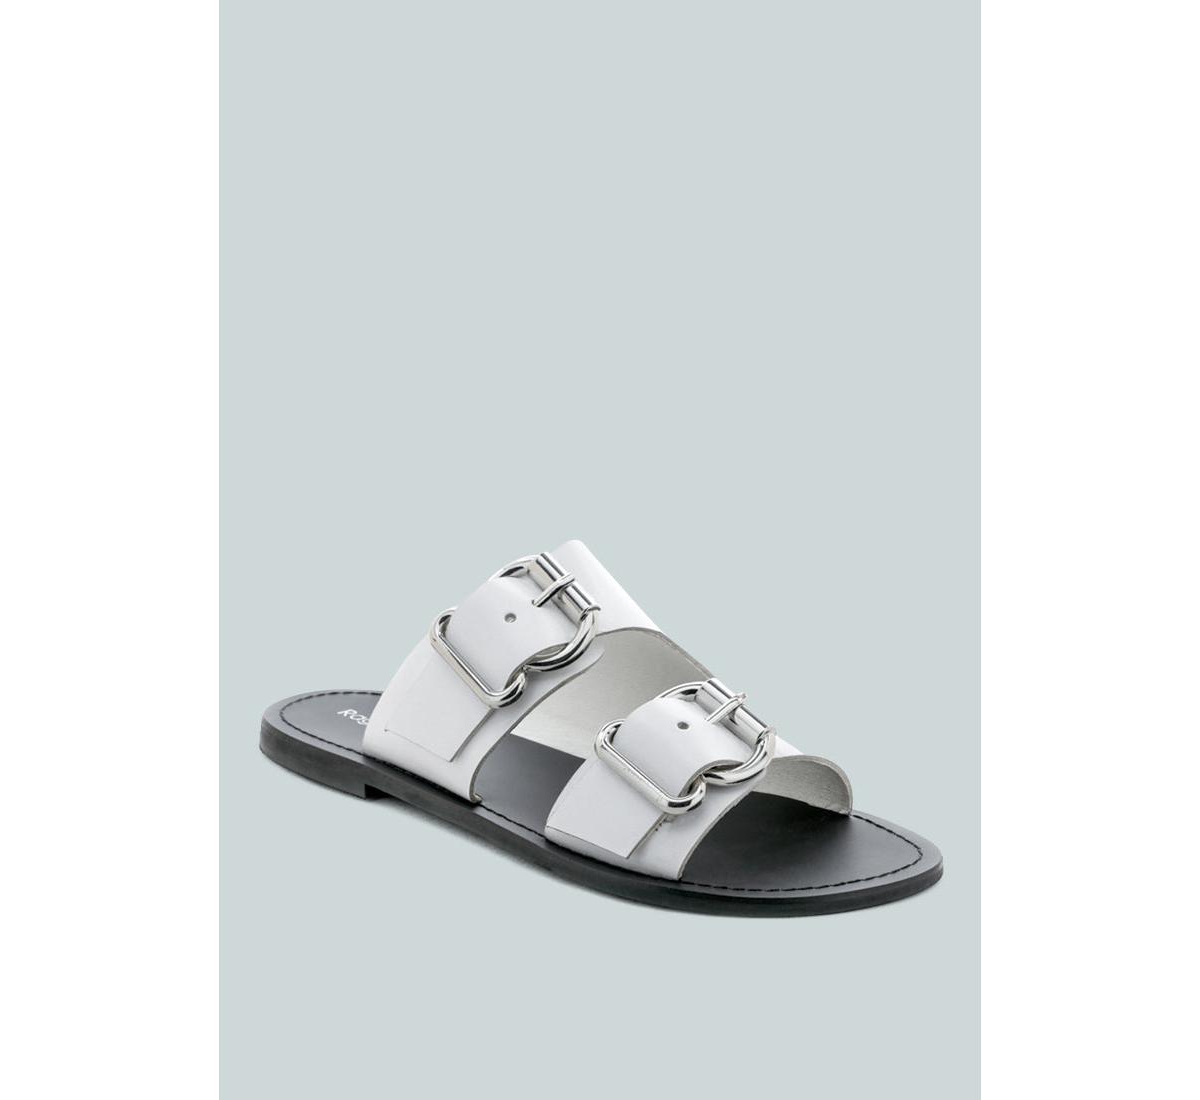 RAG & CO KELLY WOMENS FLAT SANDAL WITH BUCKLE STRAPS